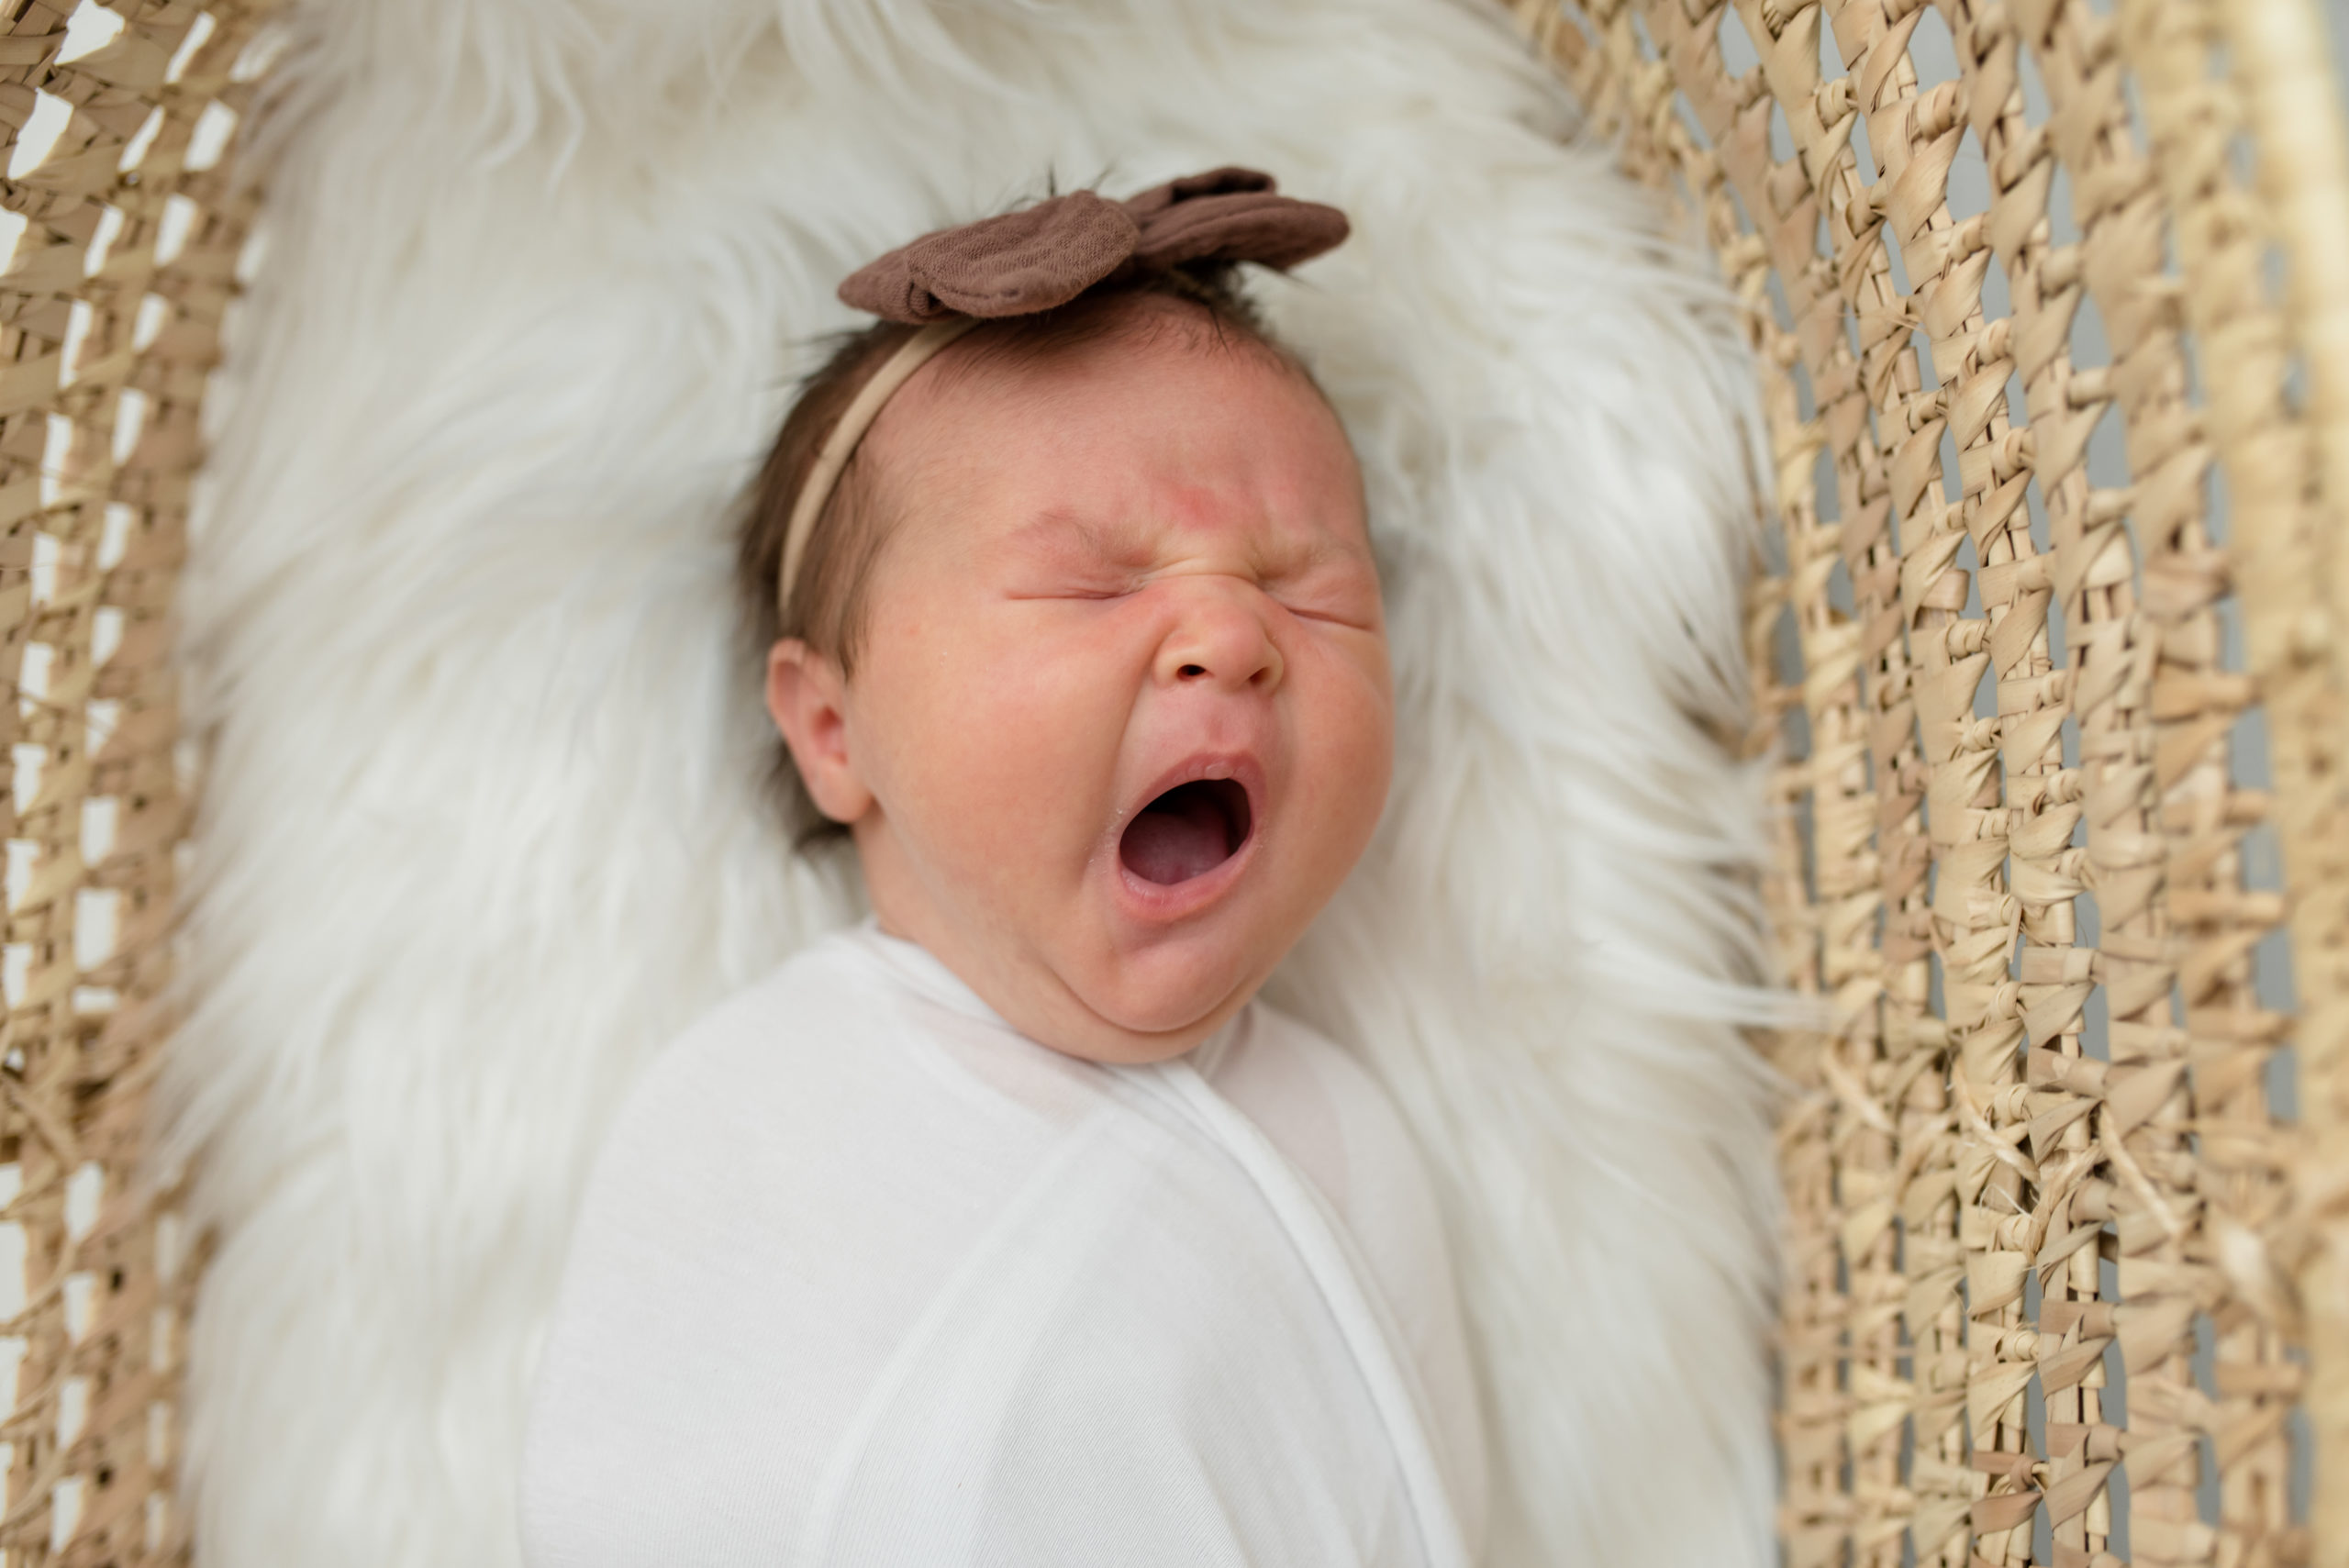 Newborn baby yawning in basket at an in-studio newborn session. Photographed by Dallas newborn photographer Lindsey Dutton Photography